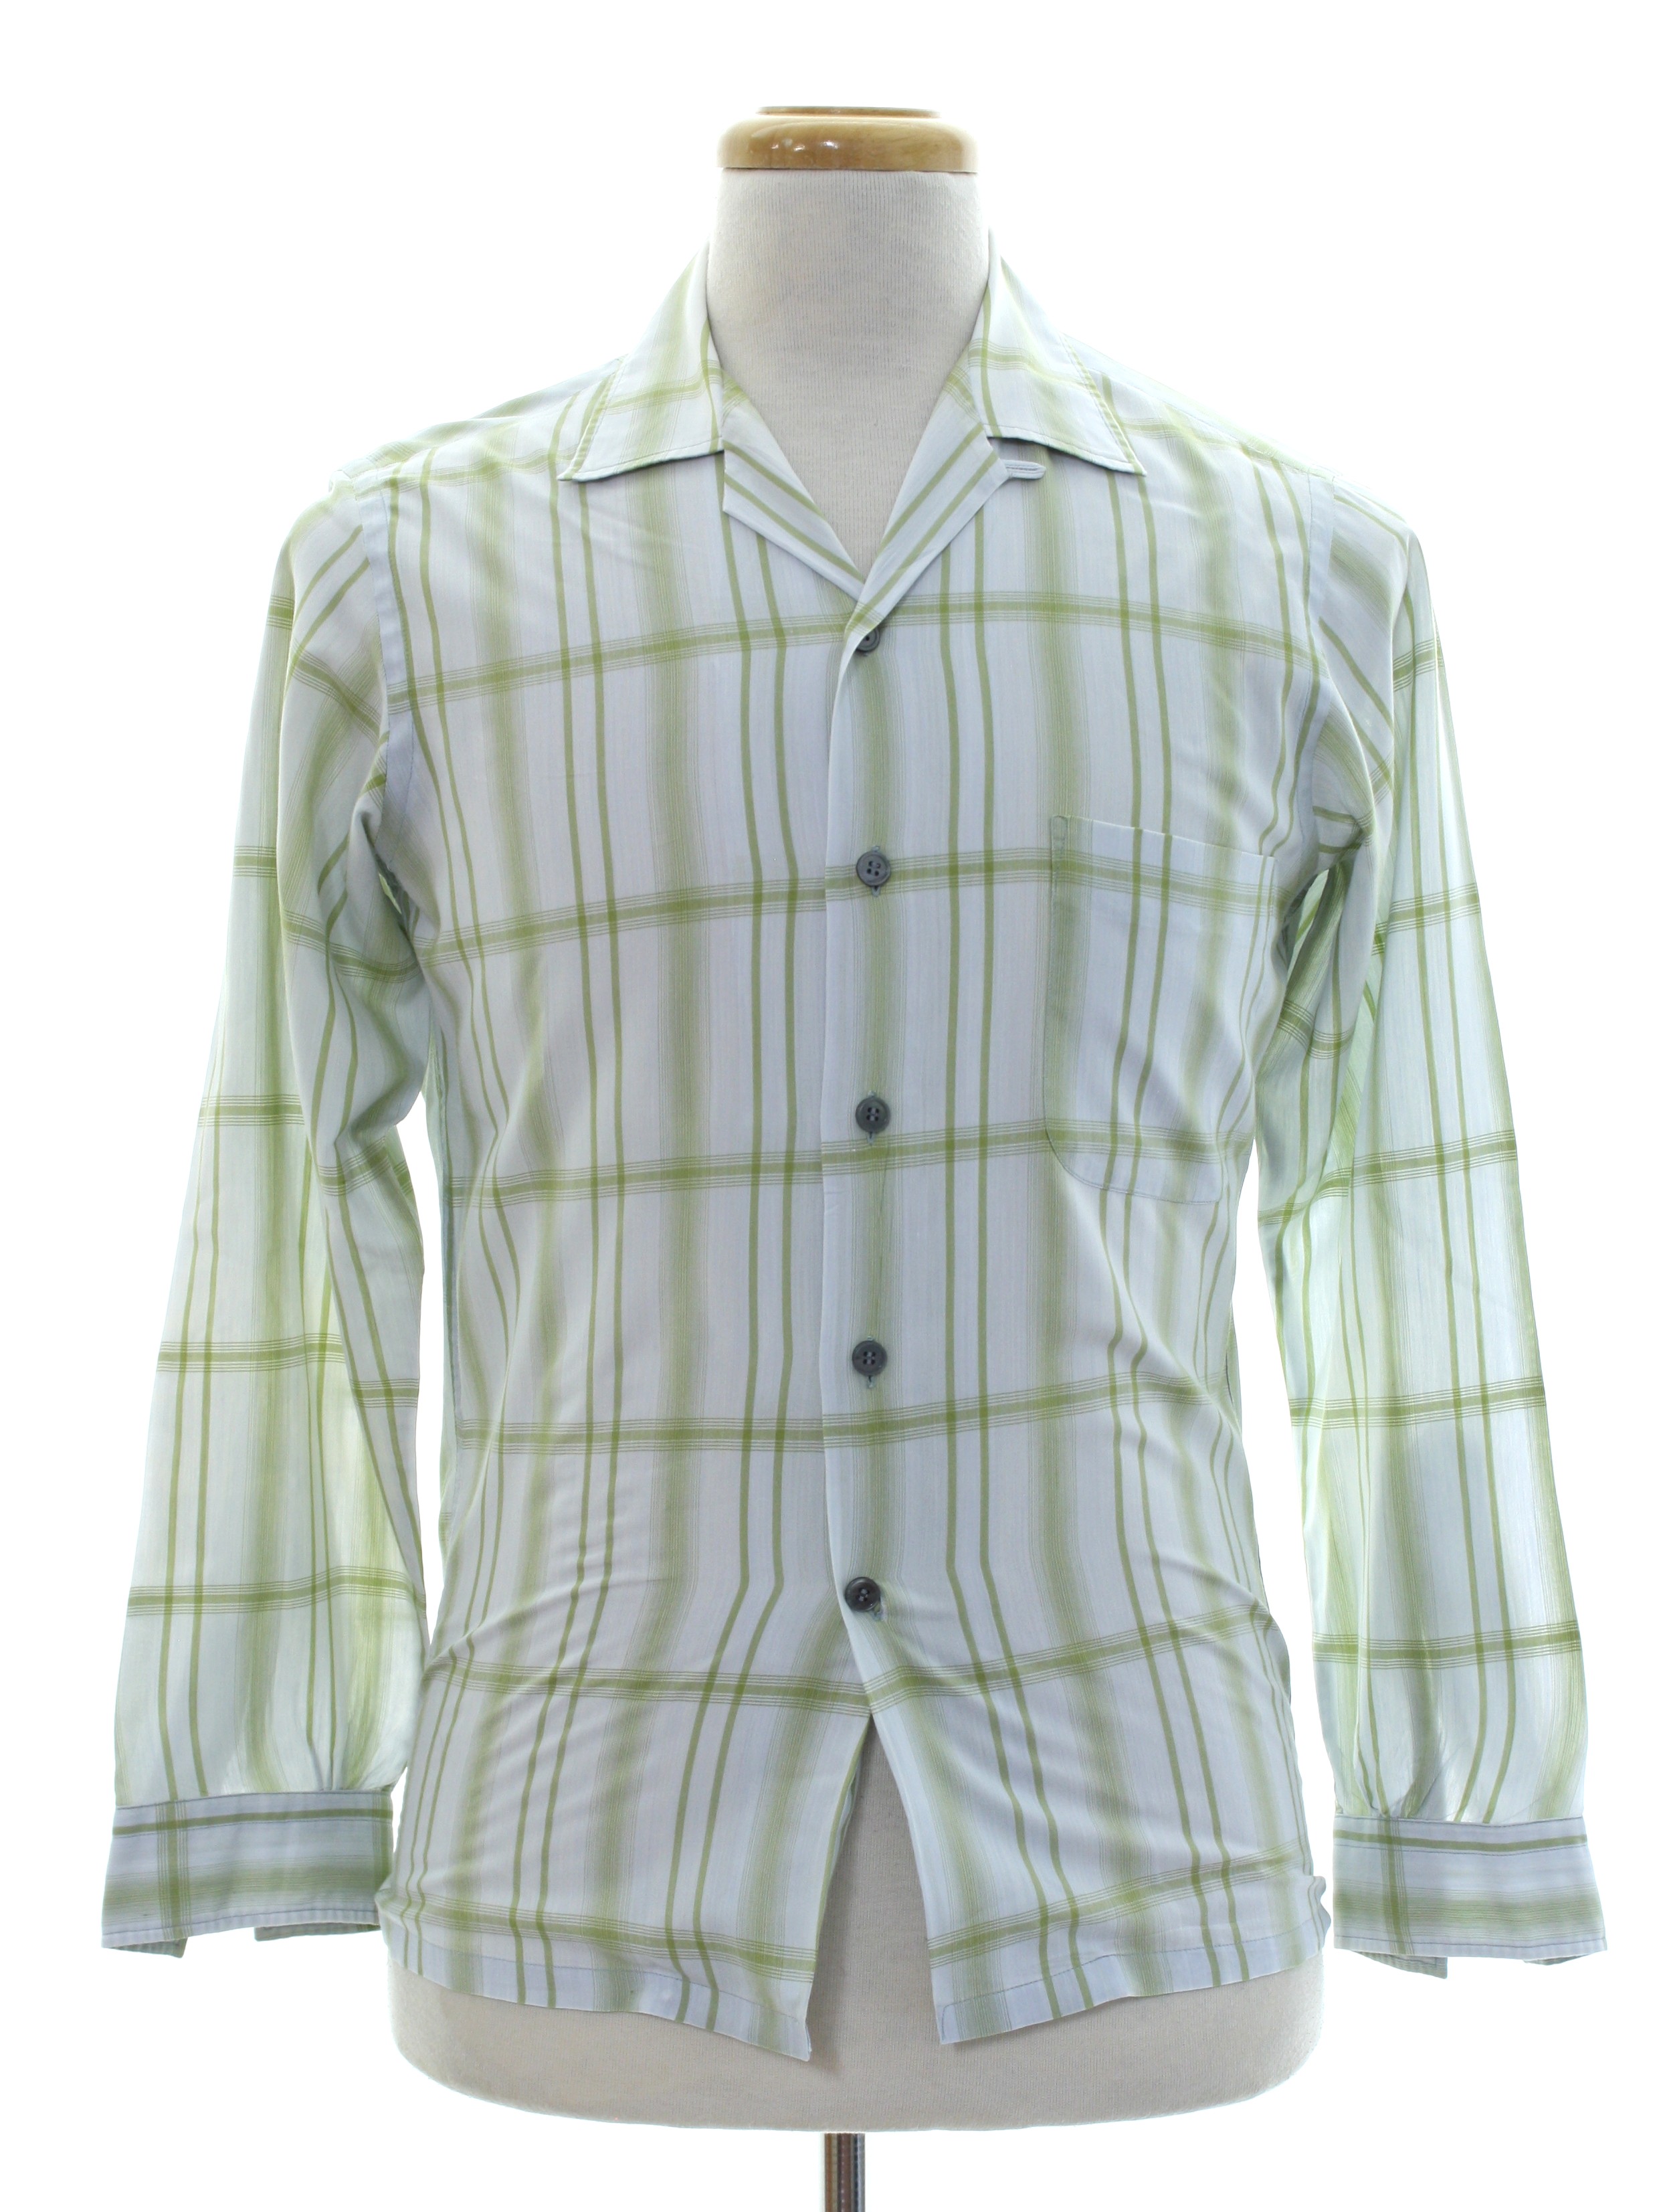 Vintage Donegal 1950s Shirt: Late 50s -Donegal- Mens pale green ...